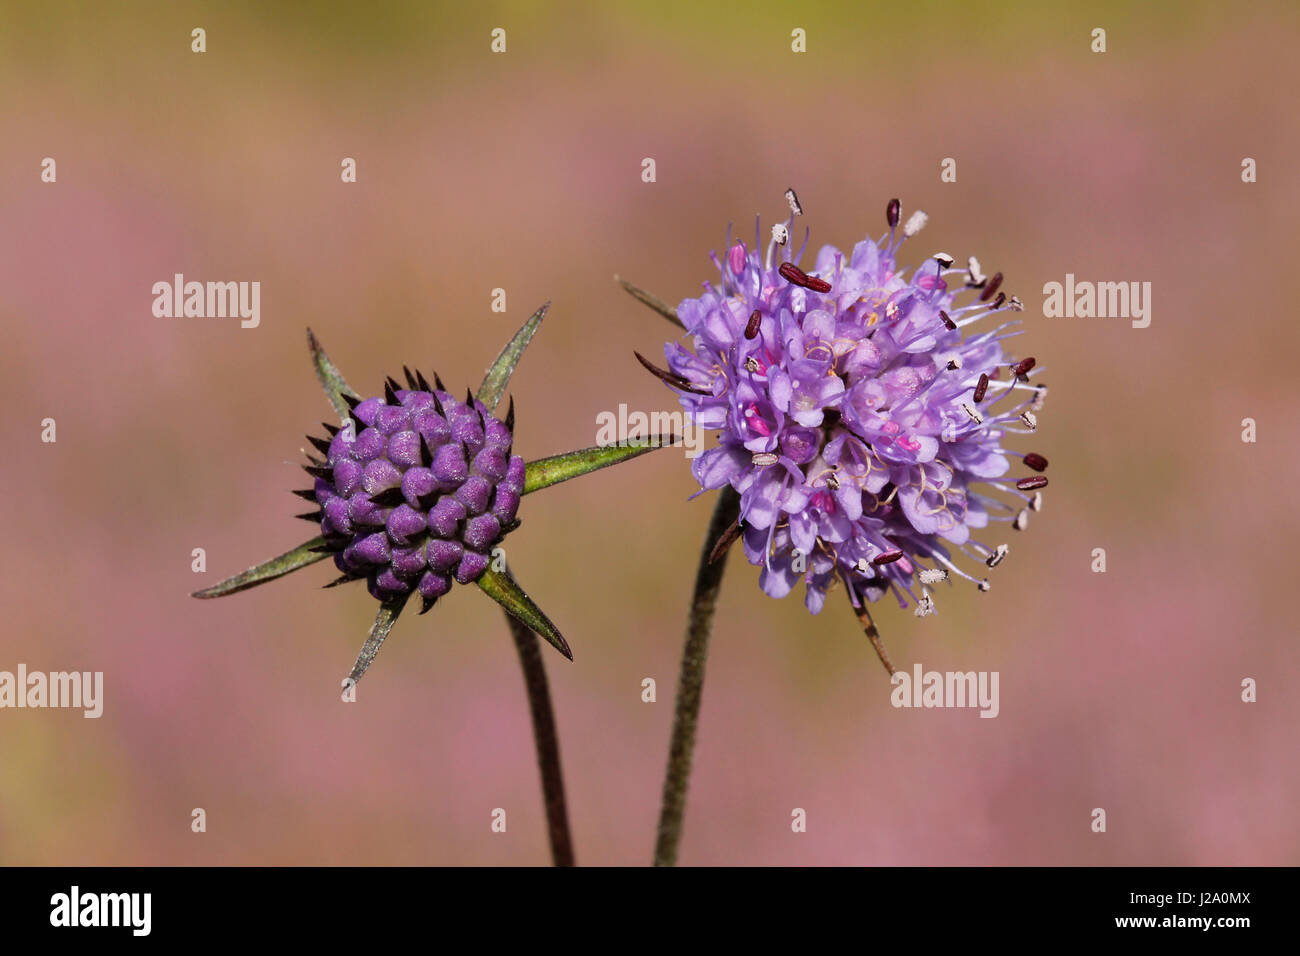 The flowers and buds of the Devil's-bit Scabious have a beautiful lila and blue-purple colour. Stock Photo